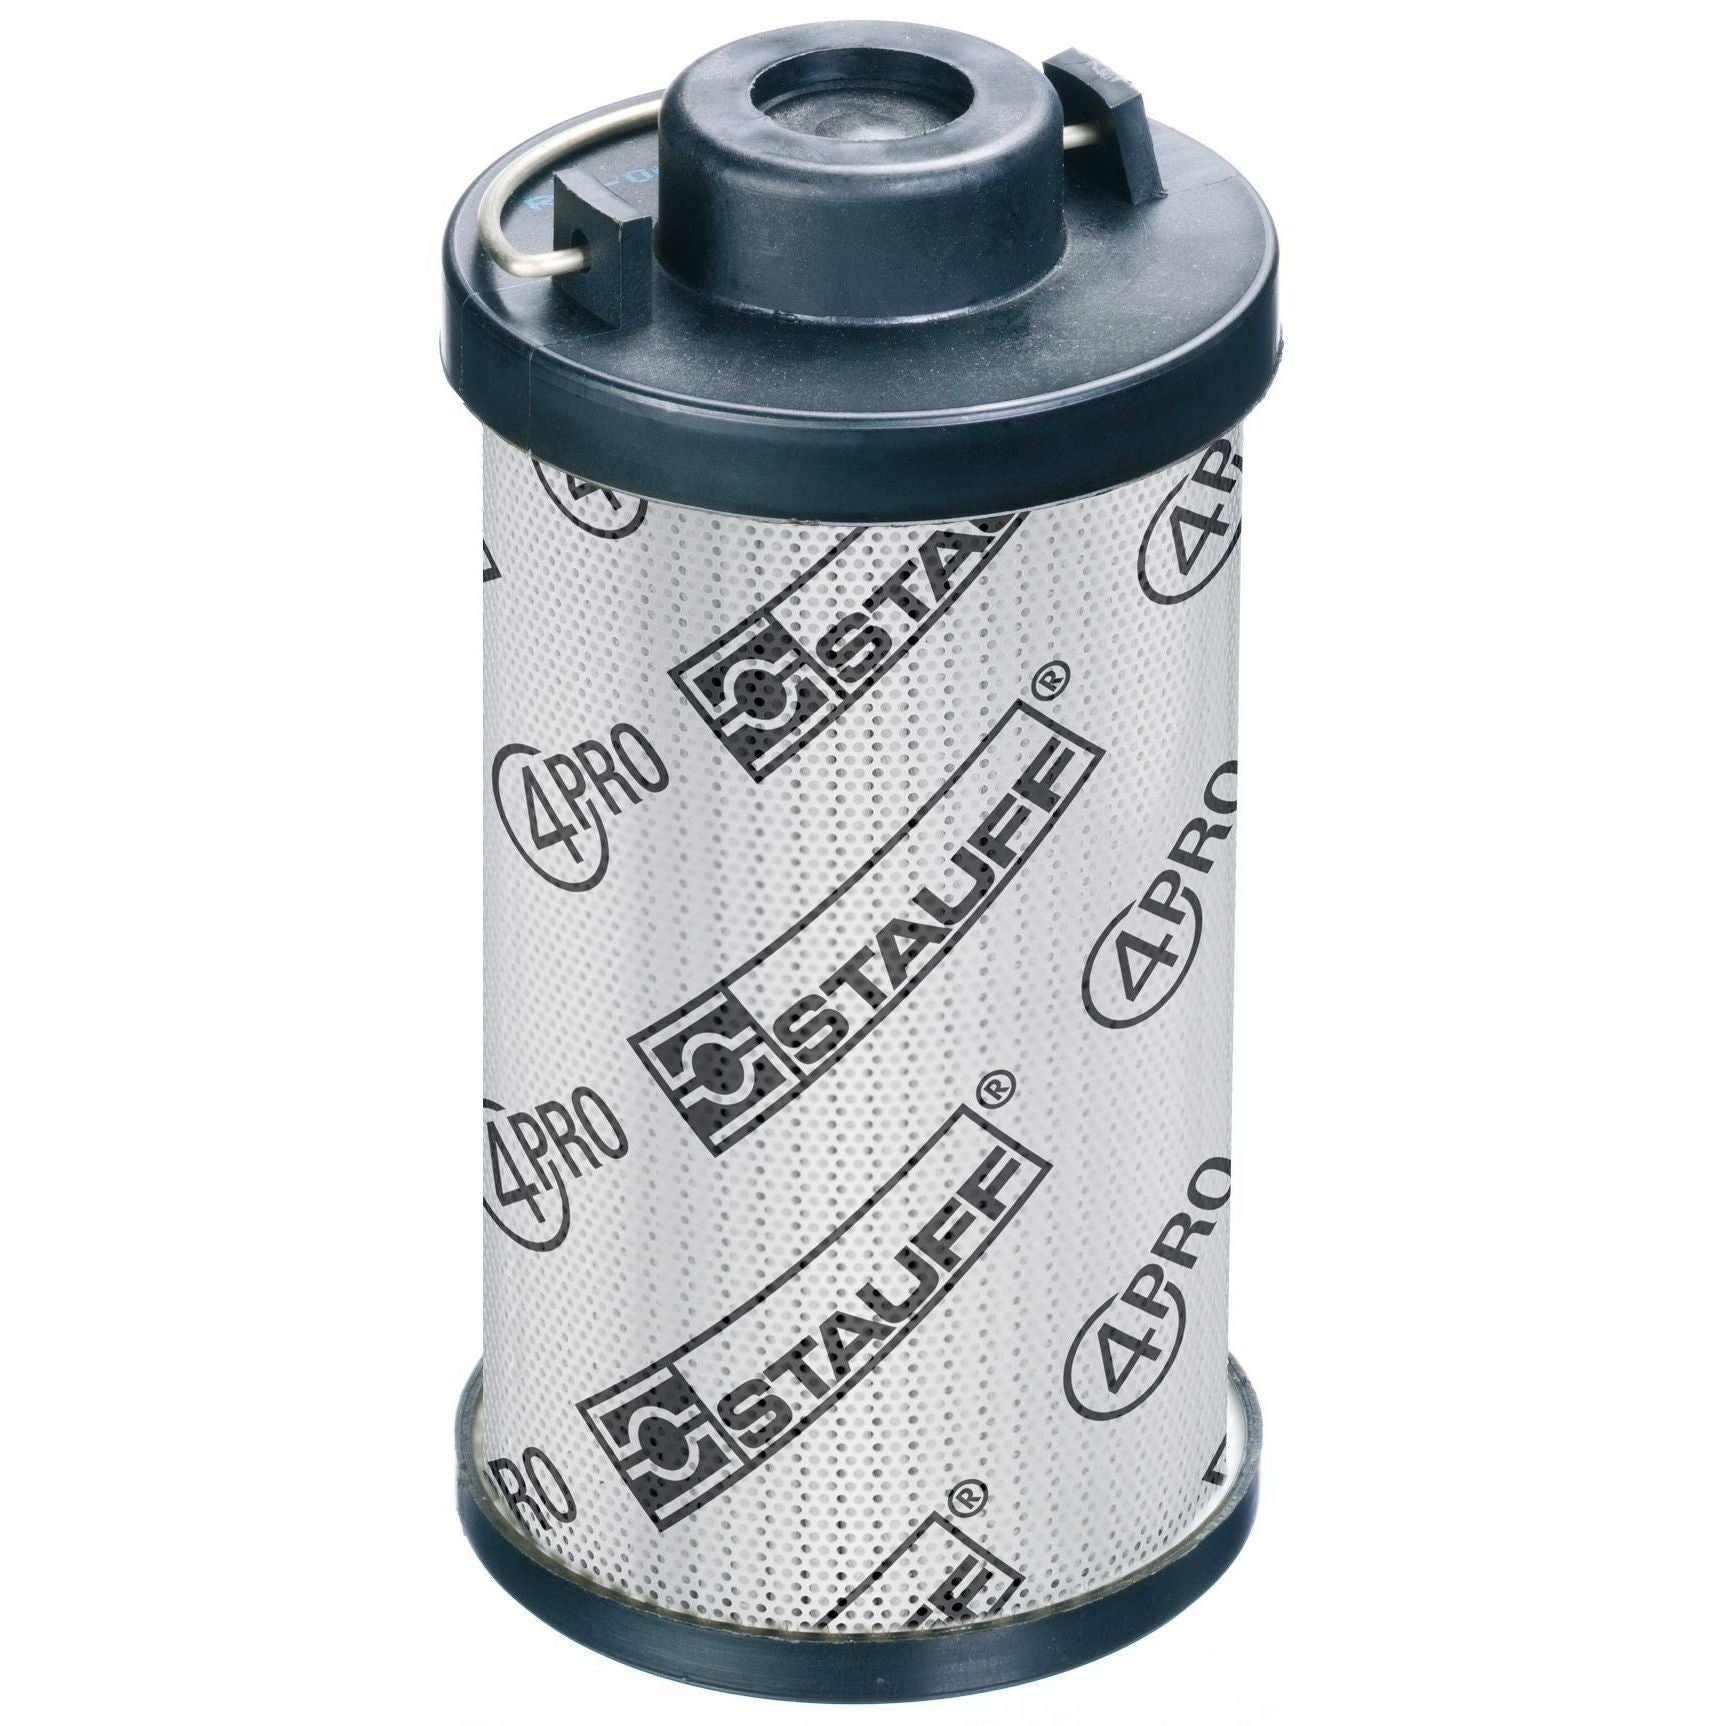 RE-022-G-10-B/4 : Stauff RF-022 Series Filter Element, 10 Micron, Synthetic, 363psi Collapse Differential, Buna